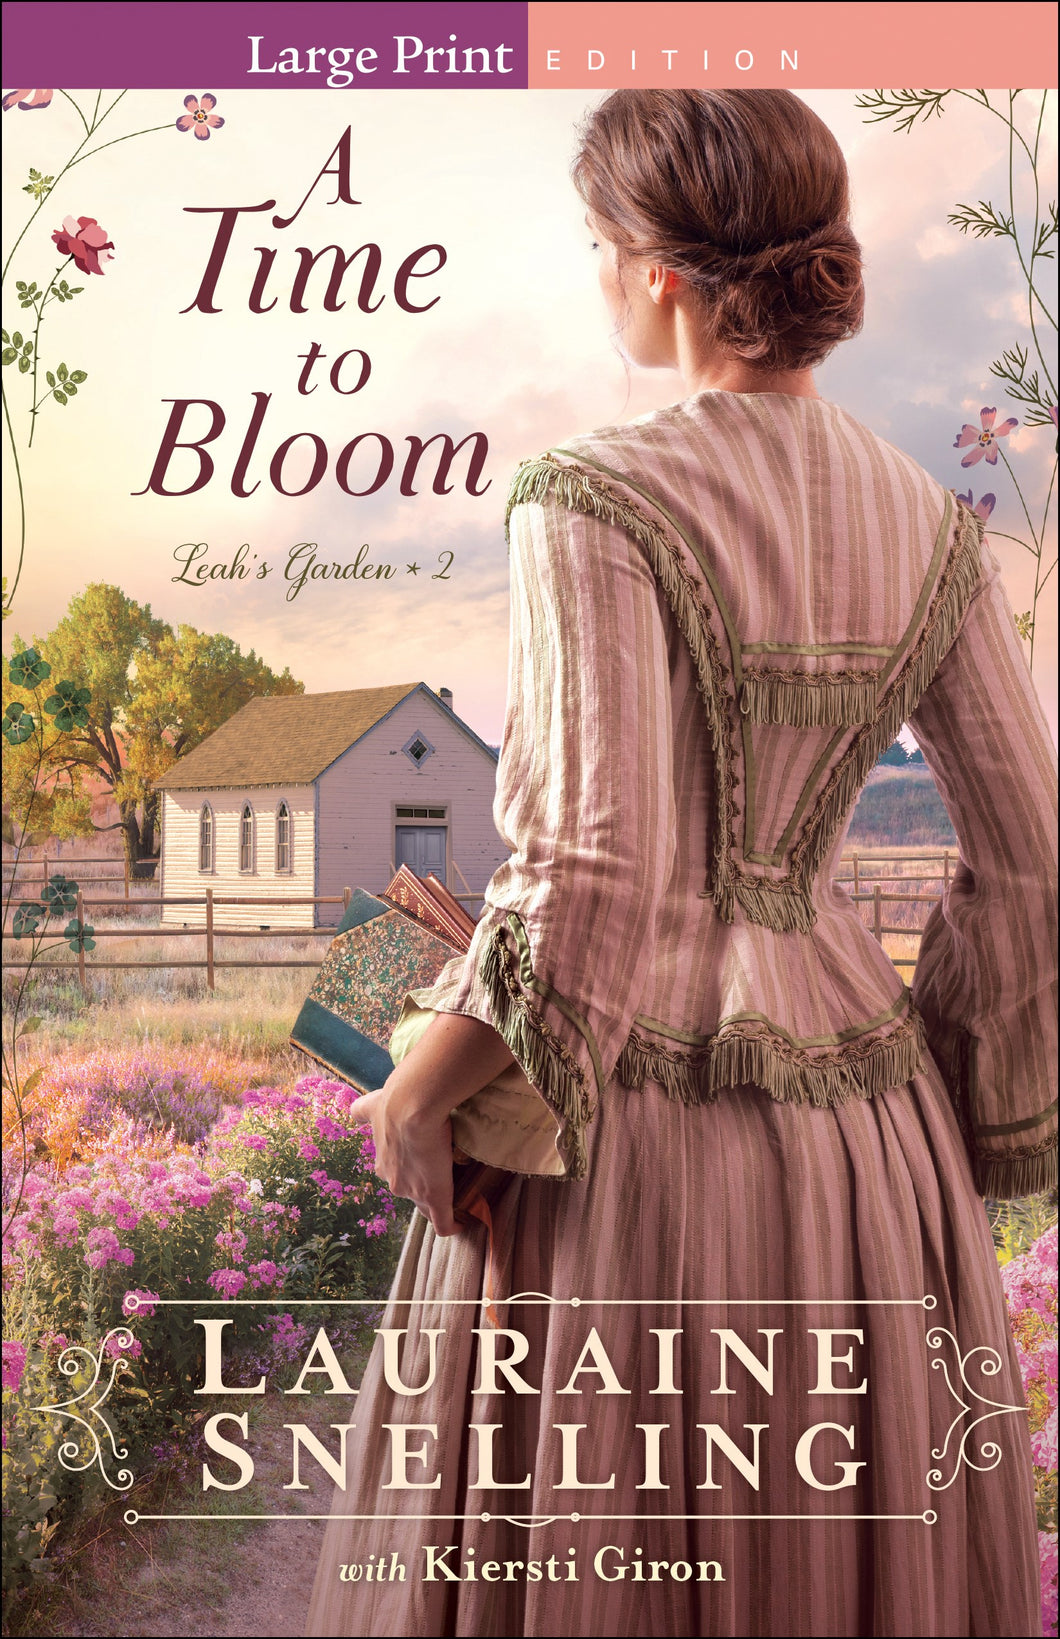 Time To Bloom - Large Print Ed (LSI)